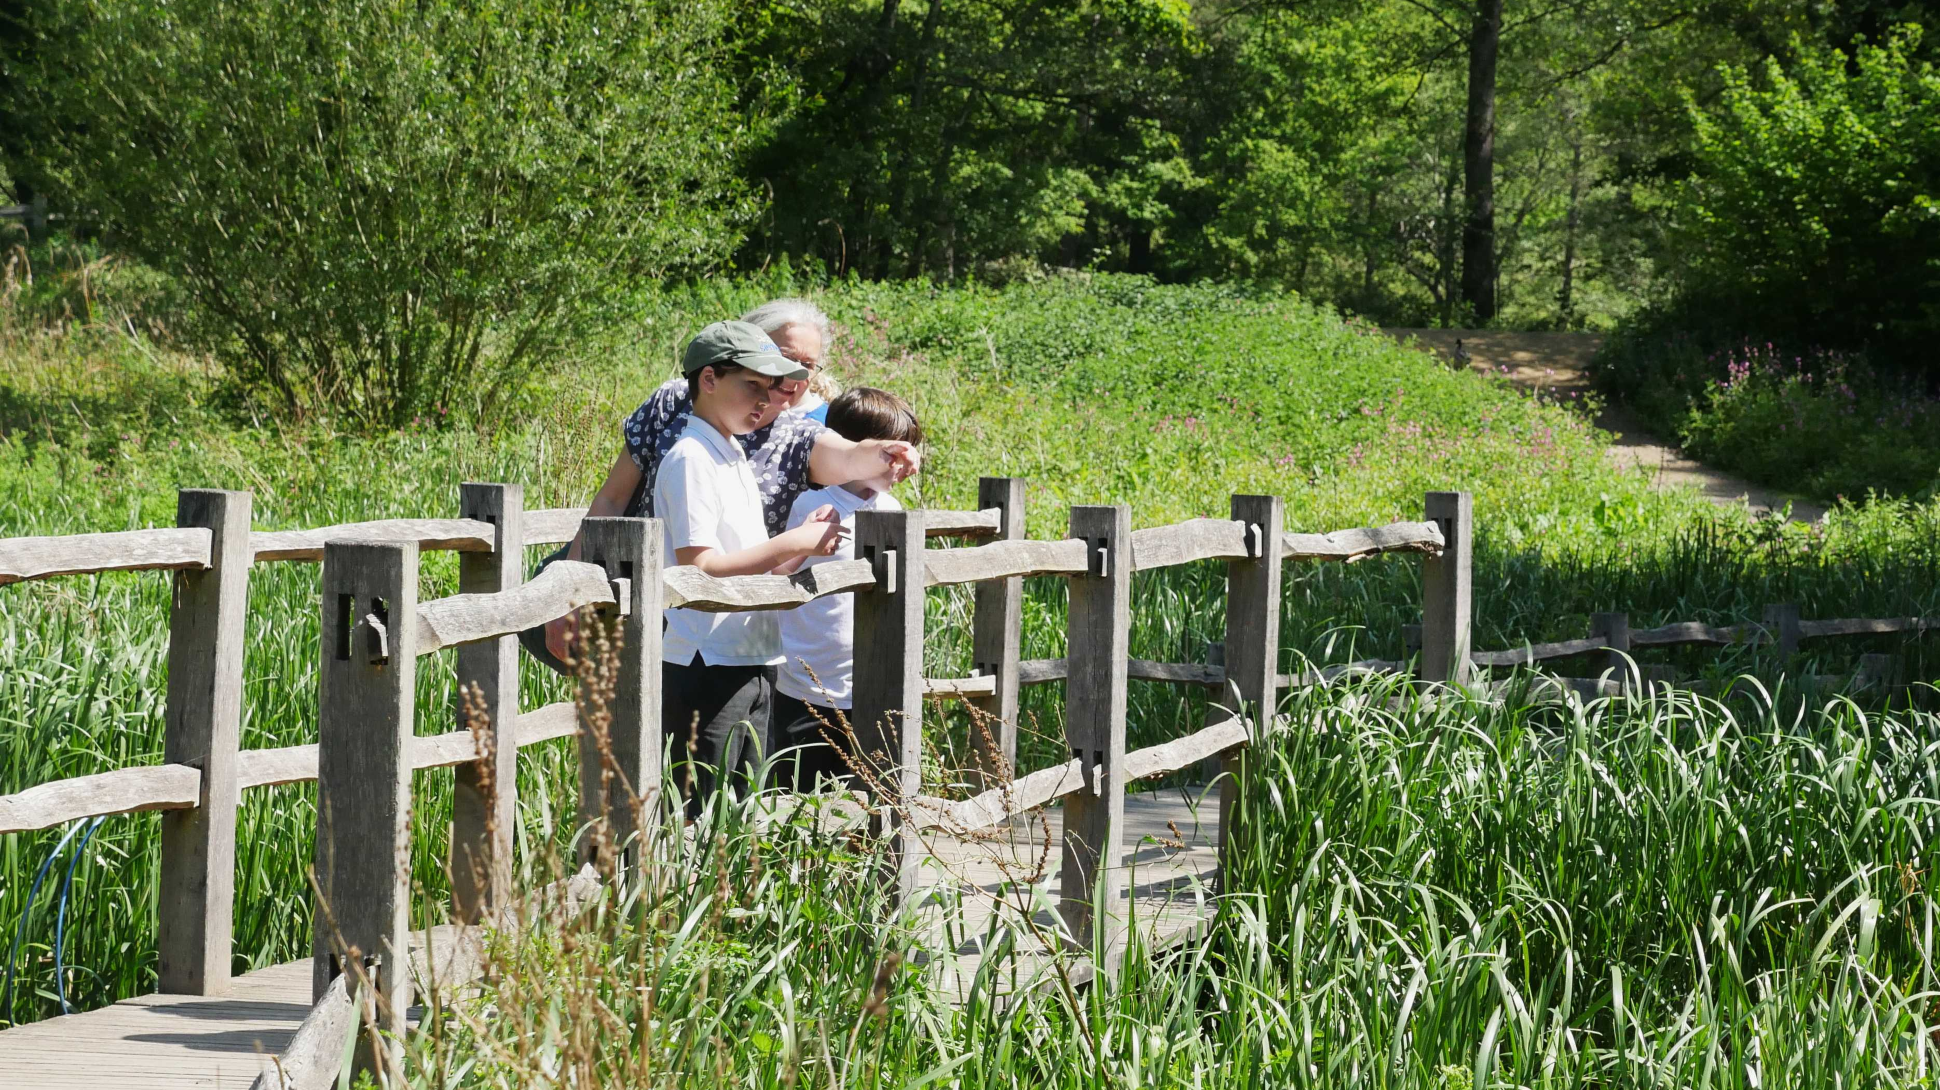 A group of people on a wooden bridge pointing at the reeds below